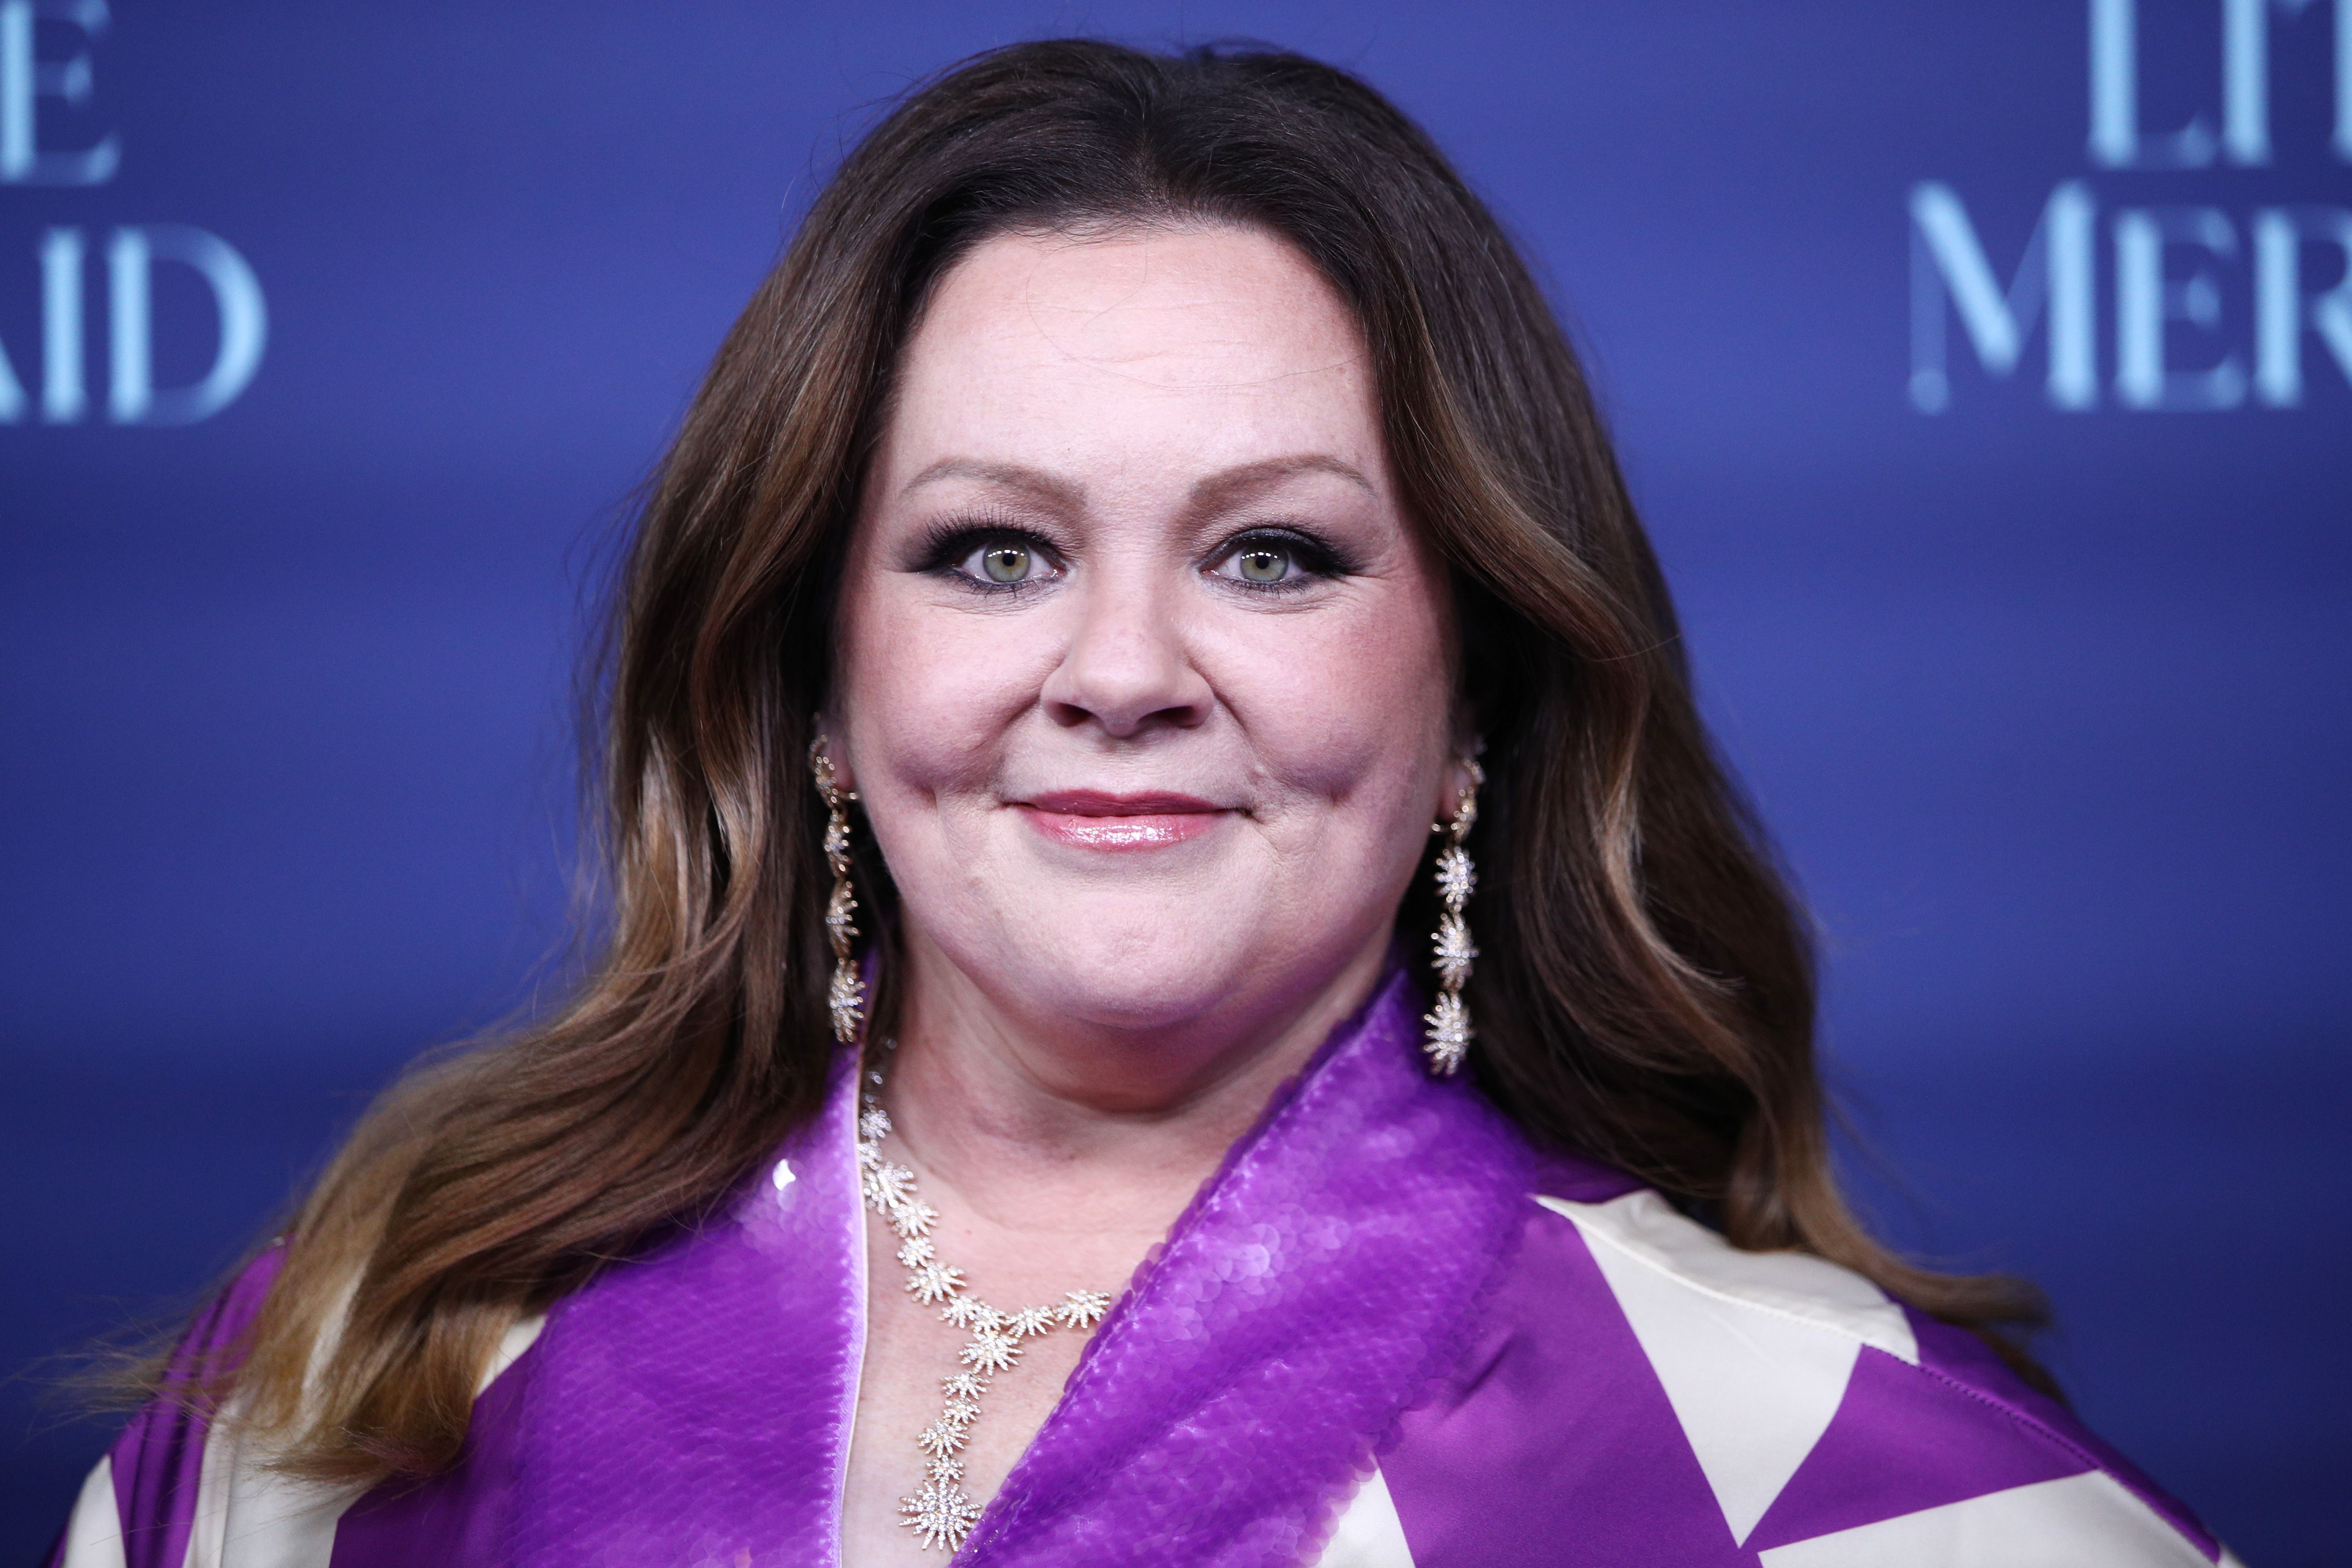 Melissa Mccarthy Attends The Australian Premiere Of The News Photo 1685663939 